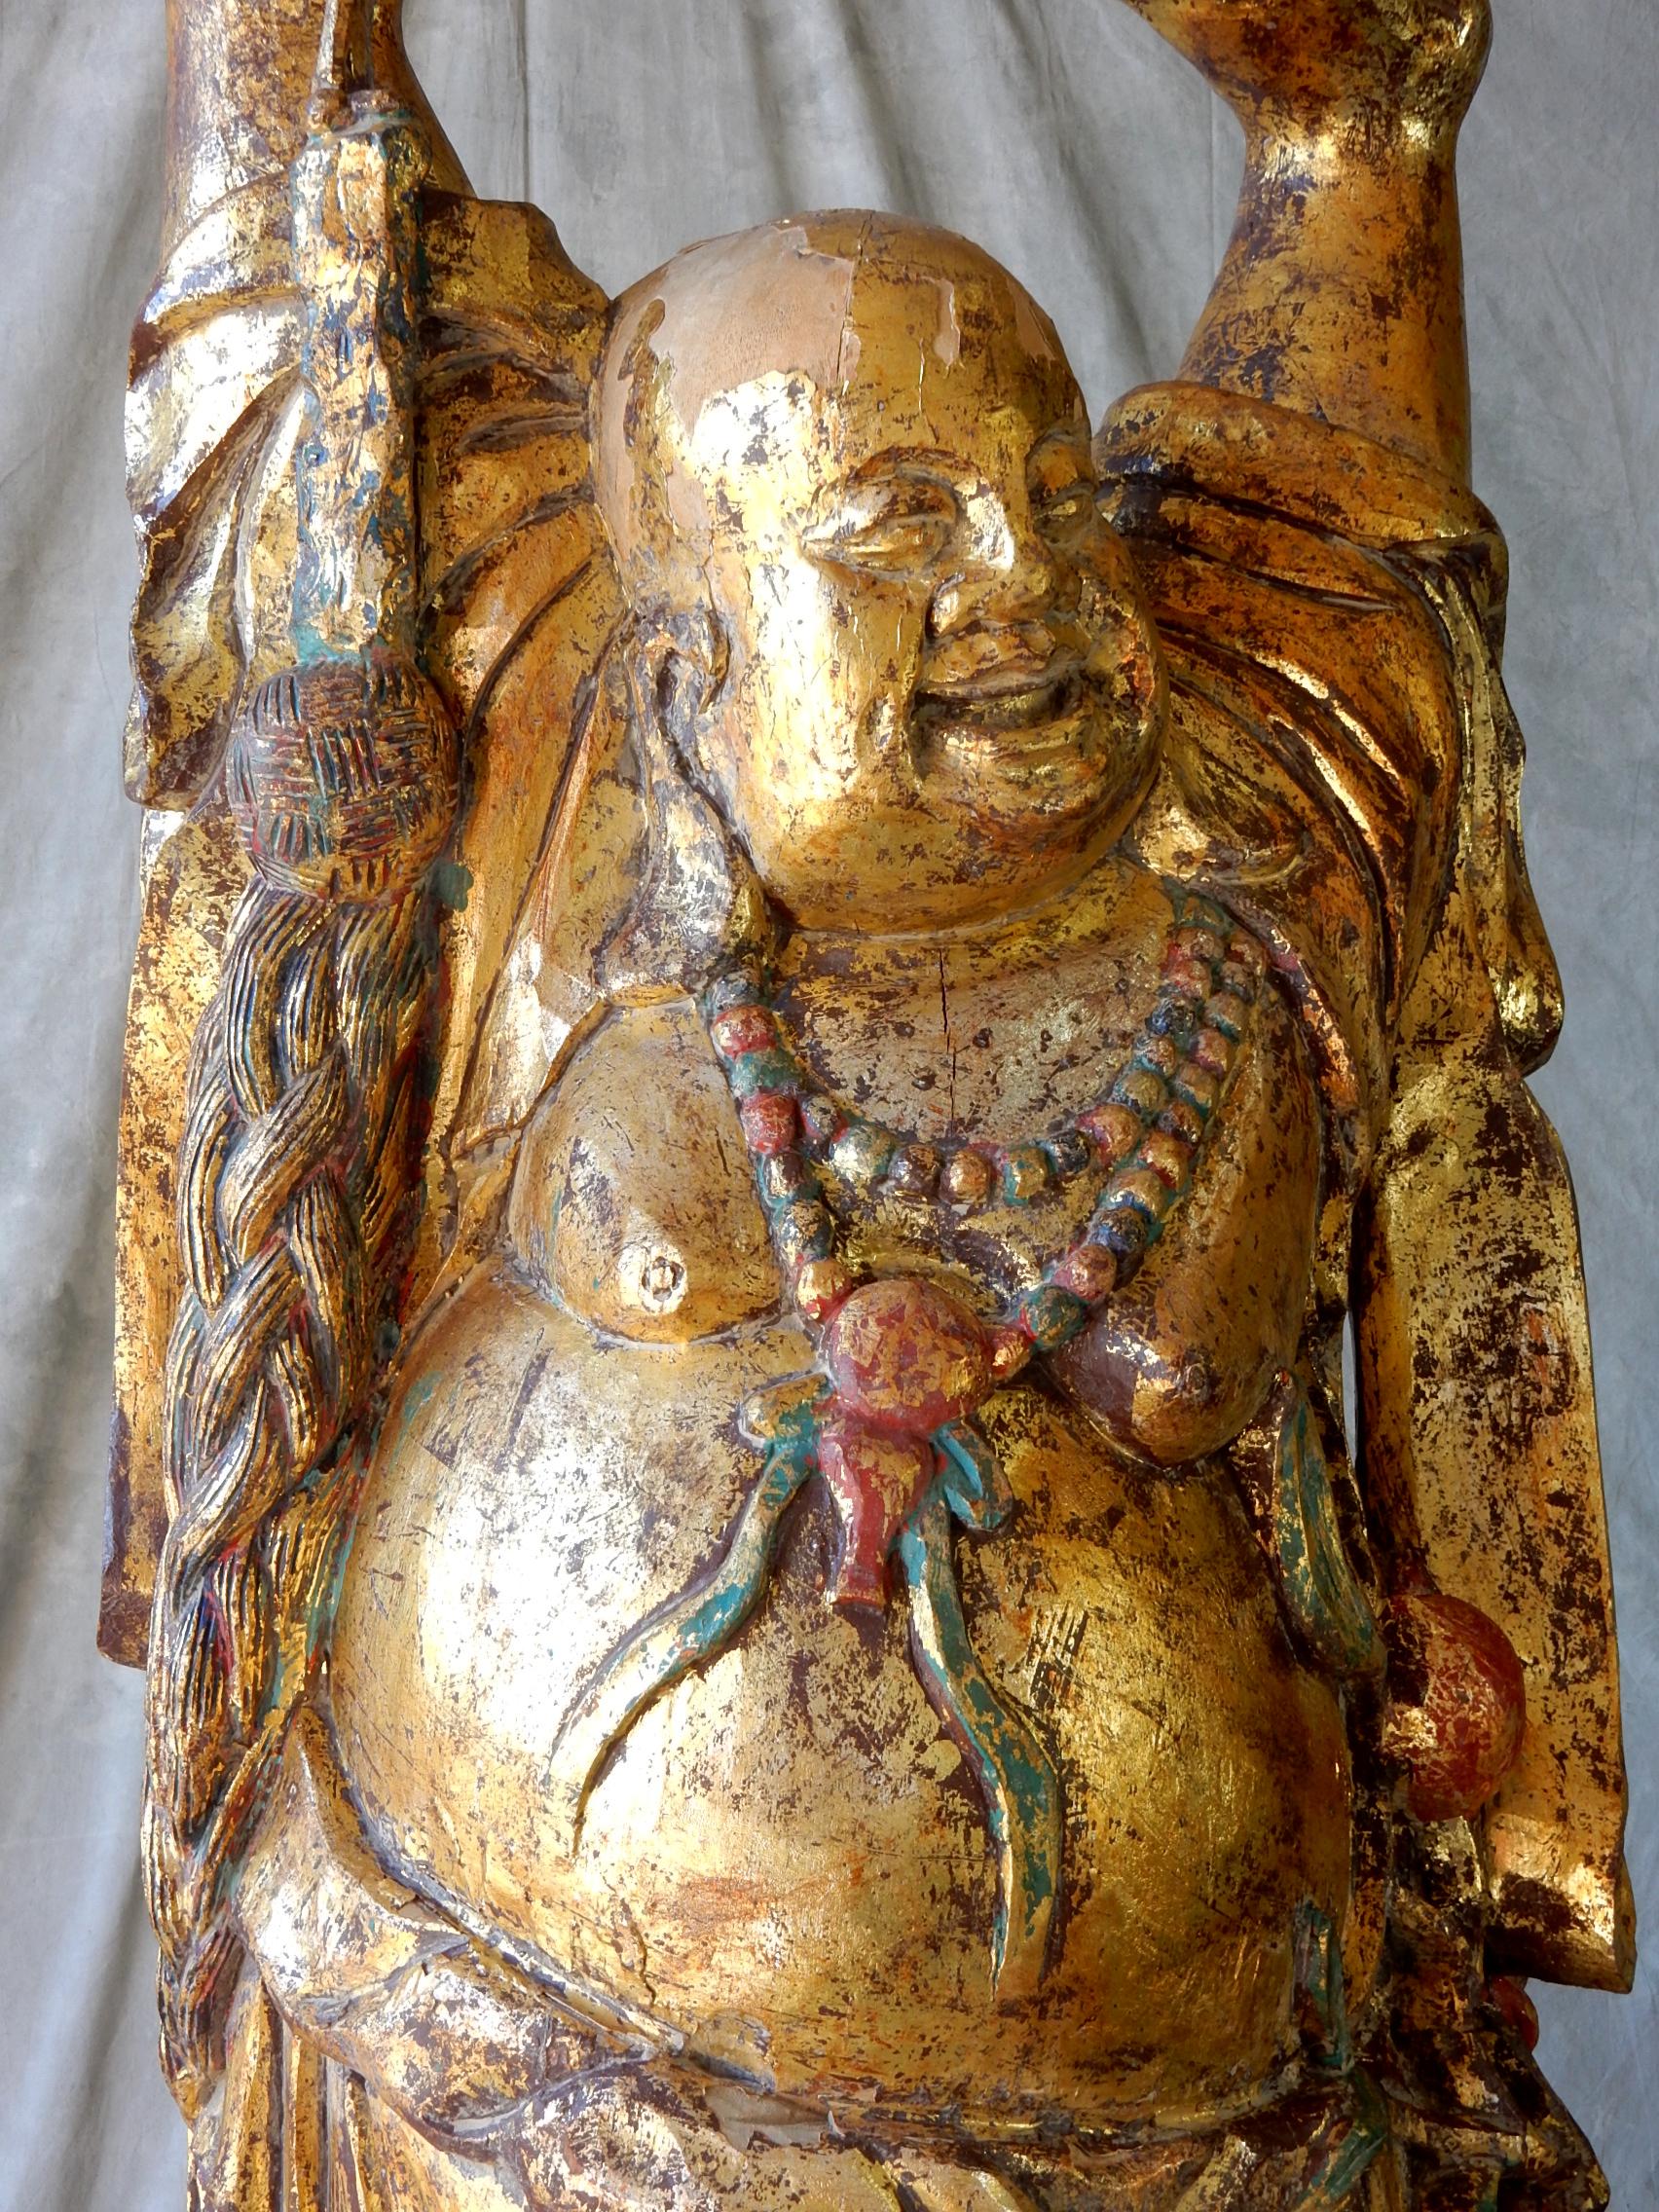 Hardwood 4 Foot Tall Vintage Happy Buddha Sculpture, Hand Carved & Painted For Sale